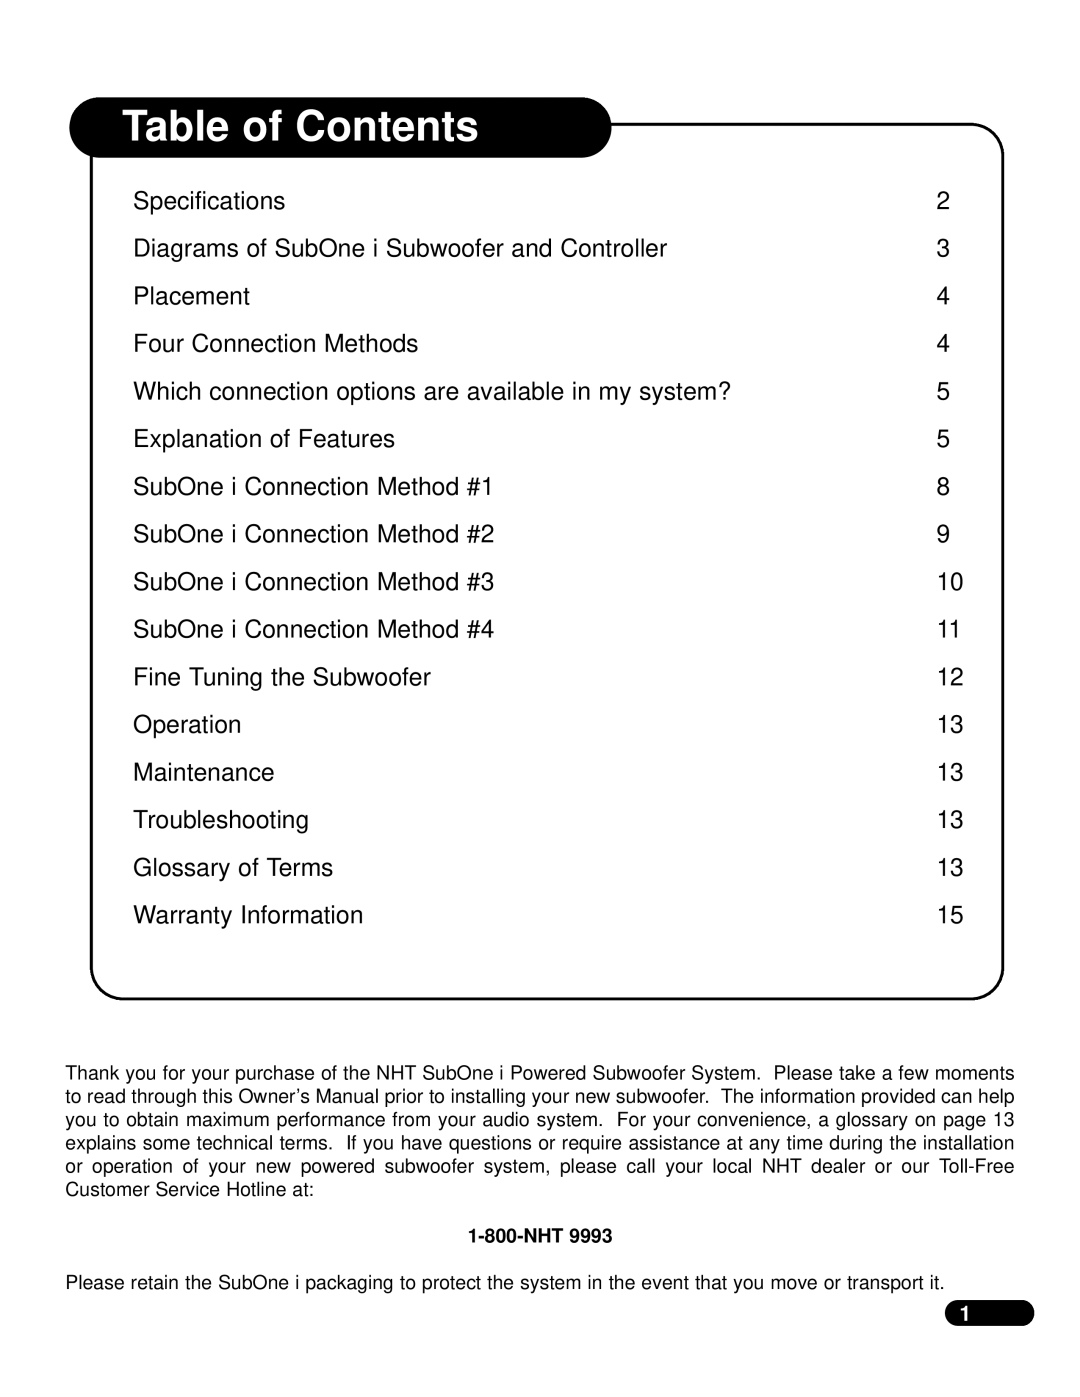 NHT SubOne i user manual Table of Contents 